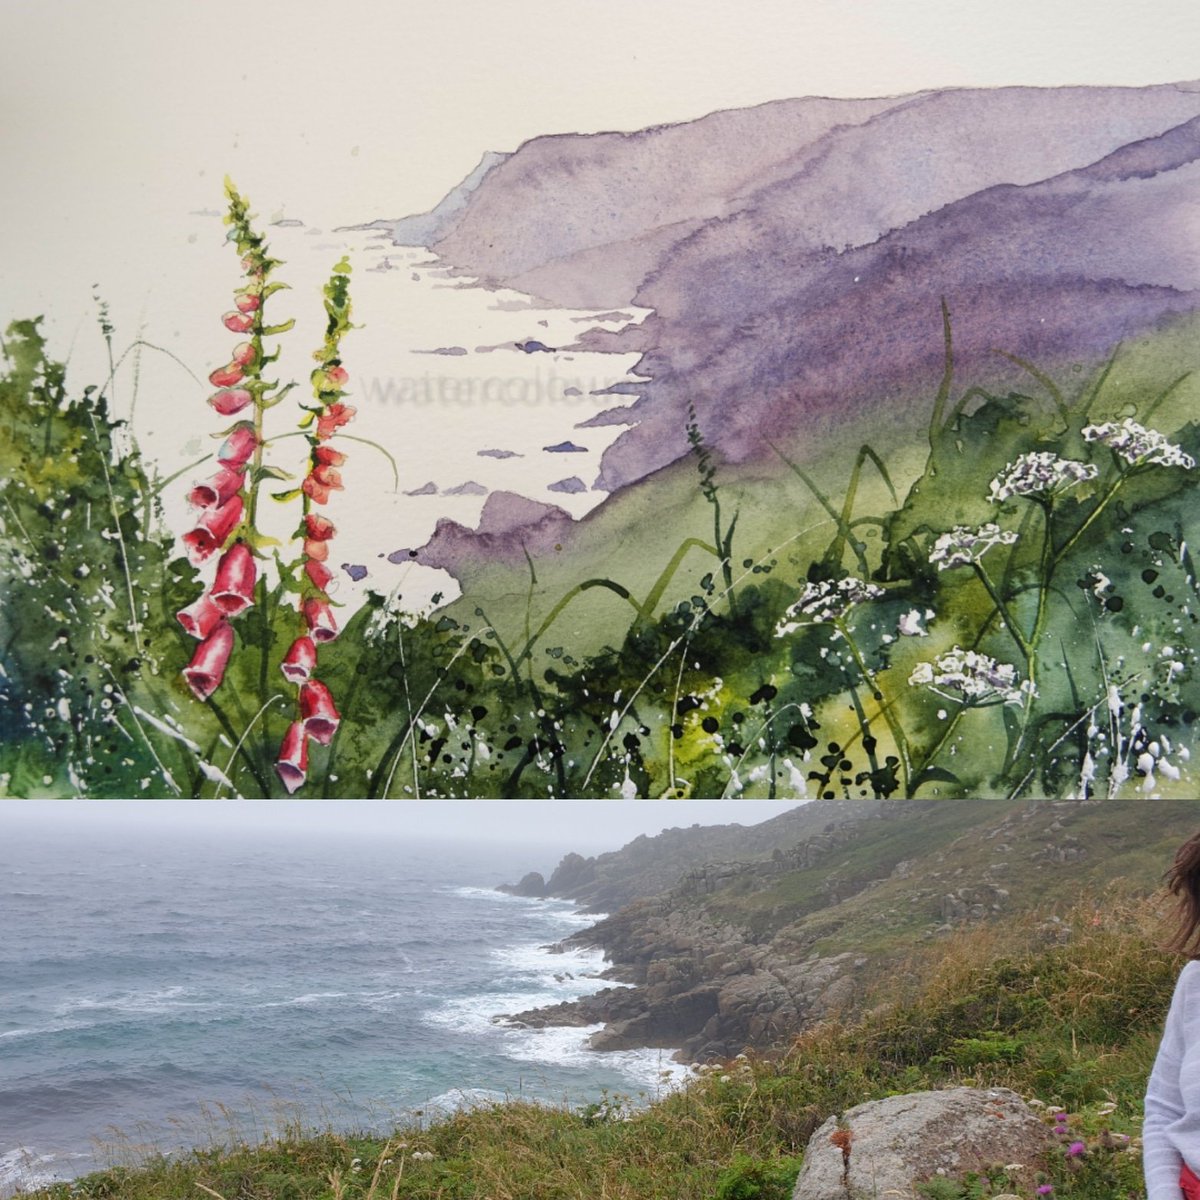 Day one in Cornwall a bit misty, but not a soul in sight, happy days

#watercolour #painting #swcoastpath #sea #Cornwall  #summer #seascape #wildflowers #coast #greens #cliffs #coastpath #art #artist #inspiration #wildplaces  #paint #headland #bigartboost #thedailysketch